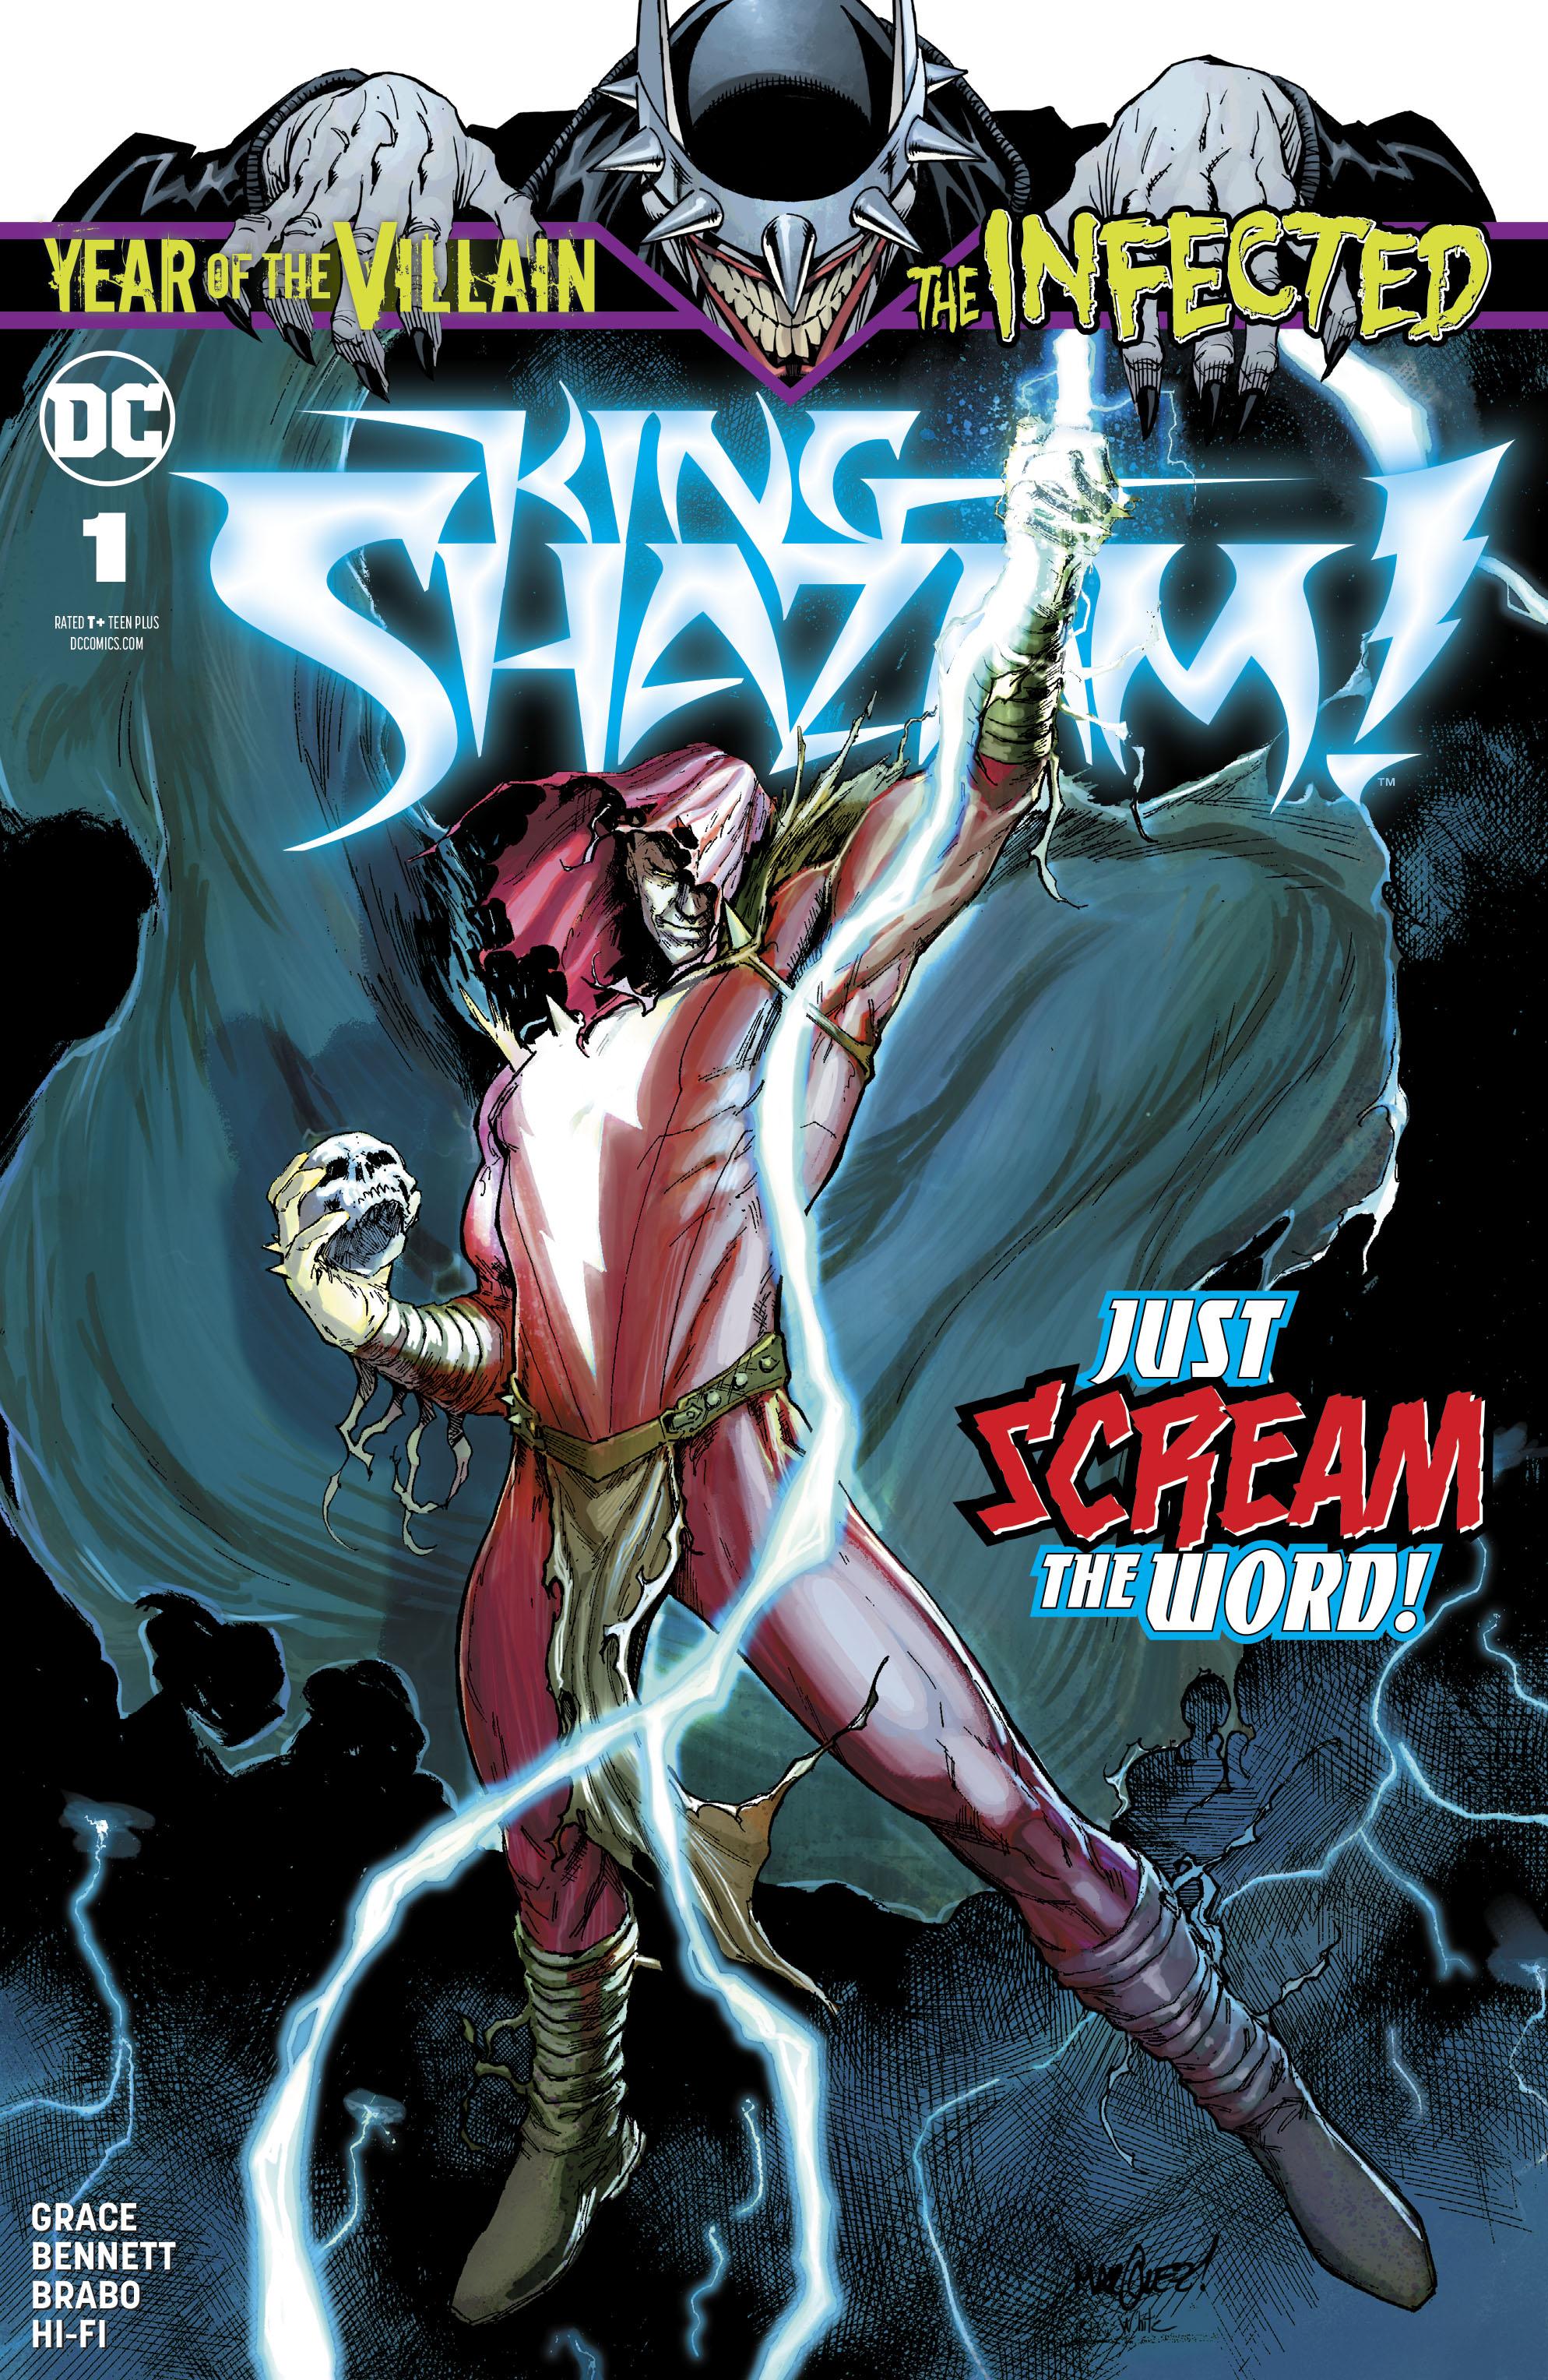 The Infected: King Shazam Vol. 1 #1